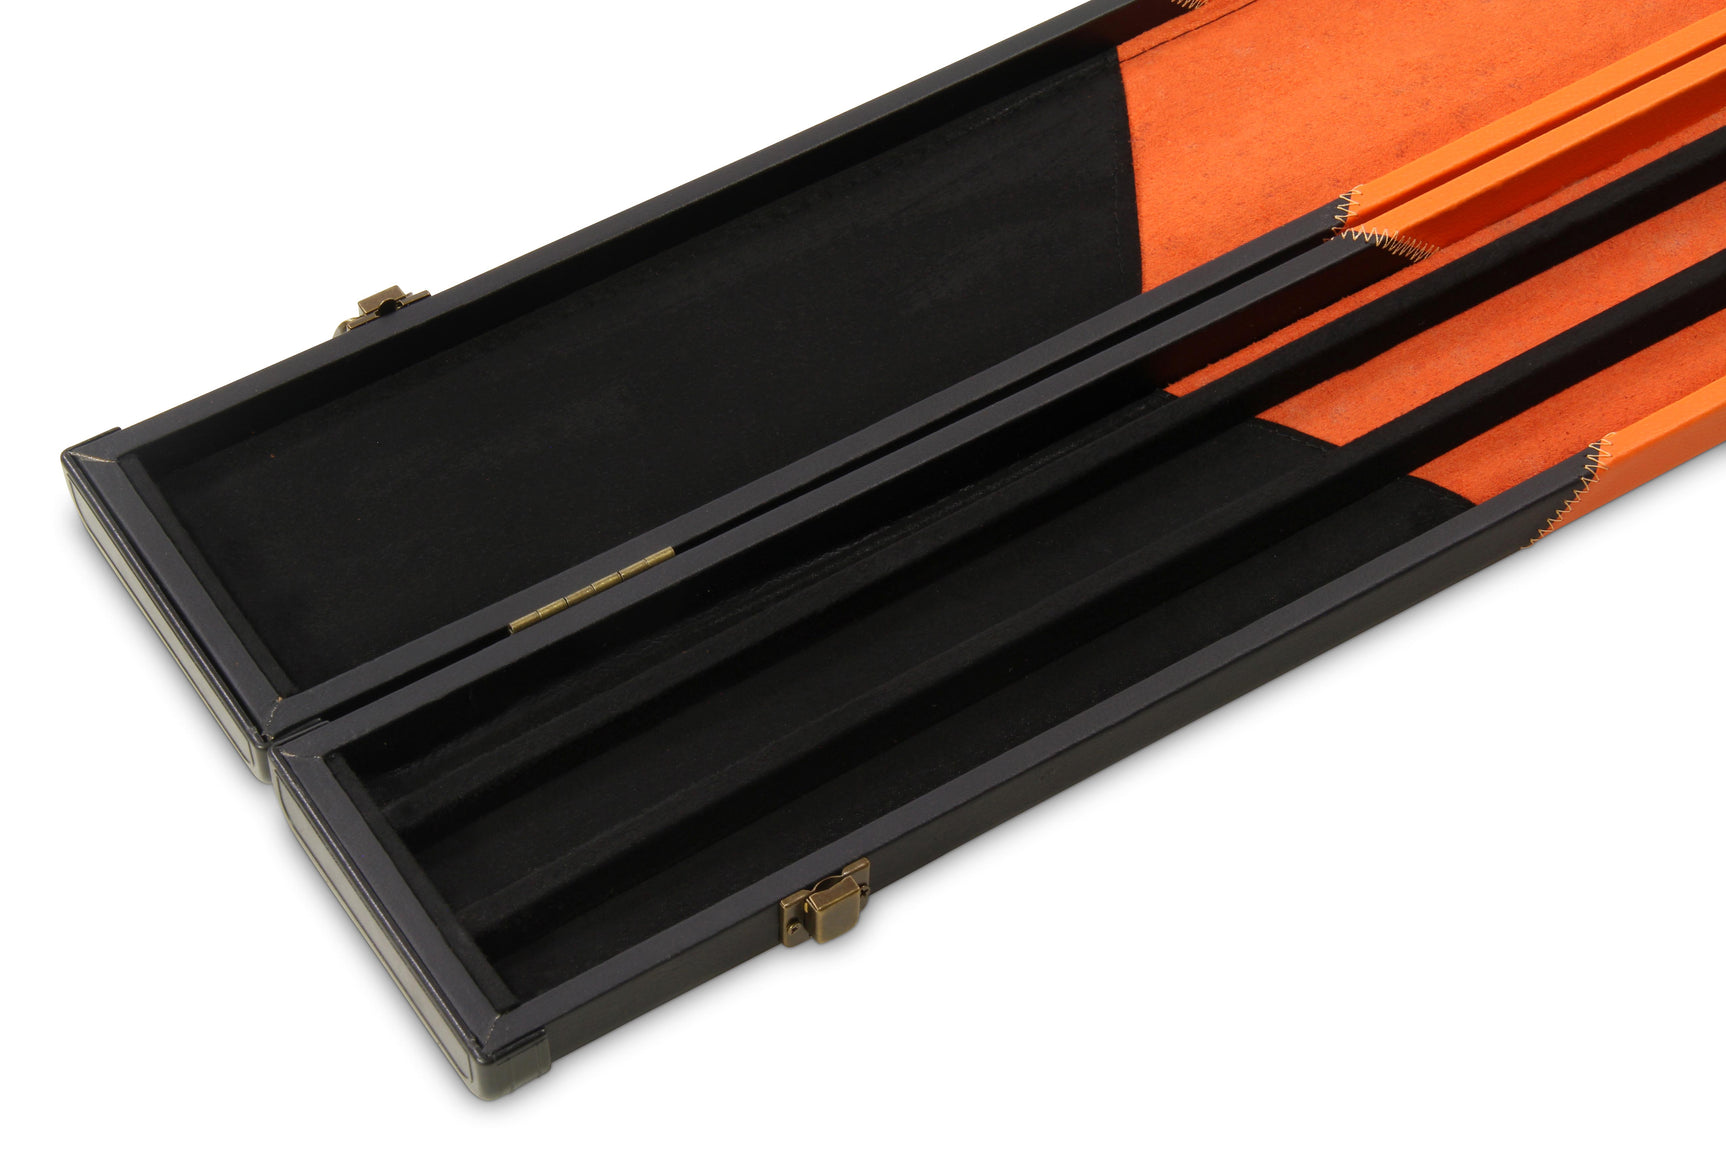 Baize Master 1 Piece ARROW Snooker Pool Cue Case with Plastic Ends - Holds 3 Cues